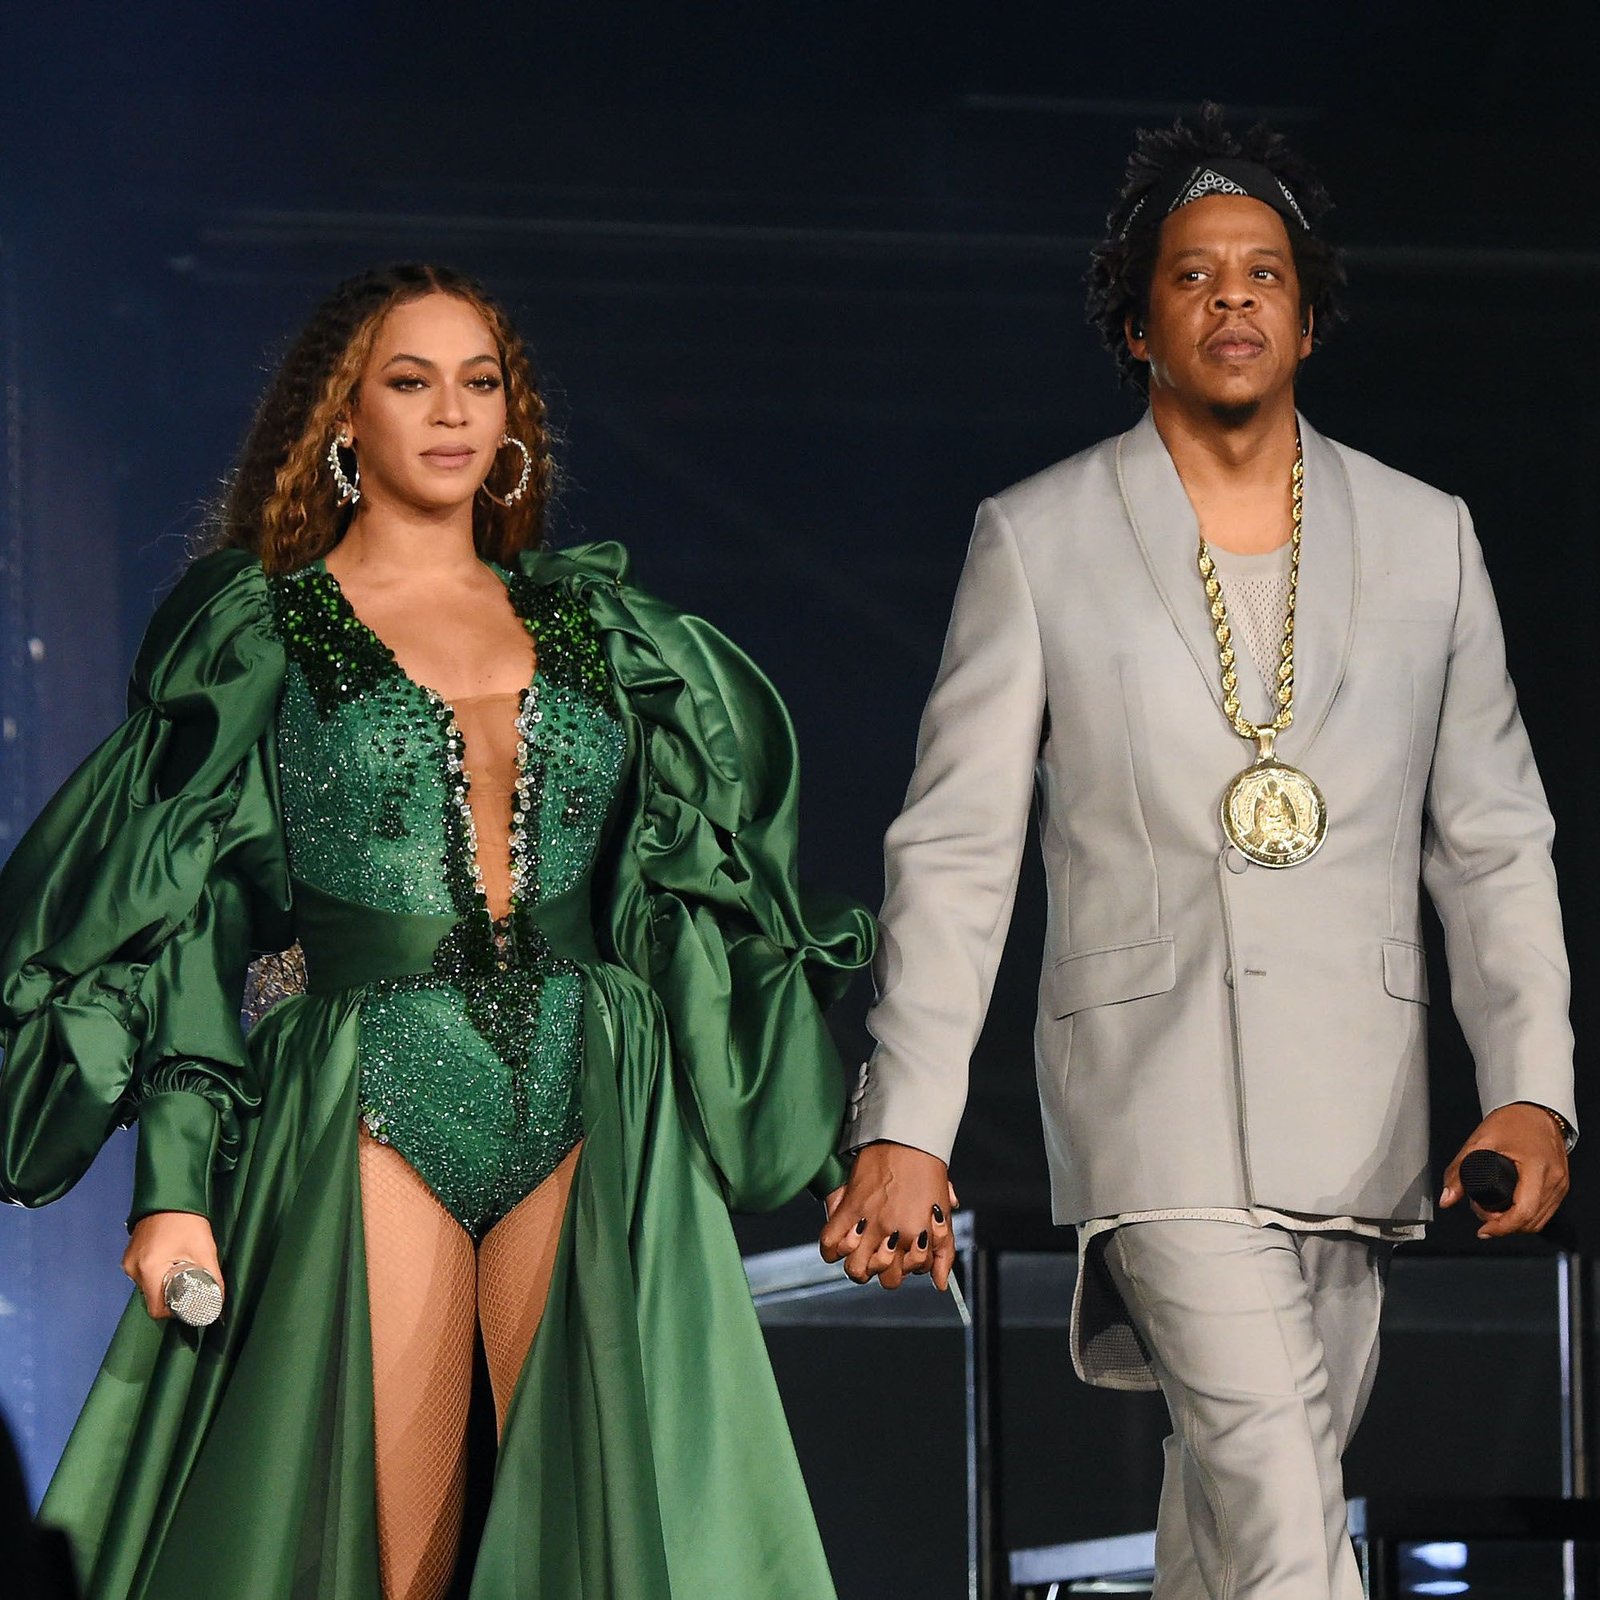 Love wins everything: Beyoncé and Jay-Z more than a decade in a successful marriage